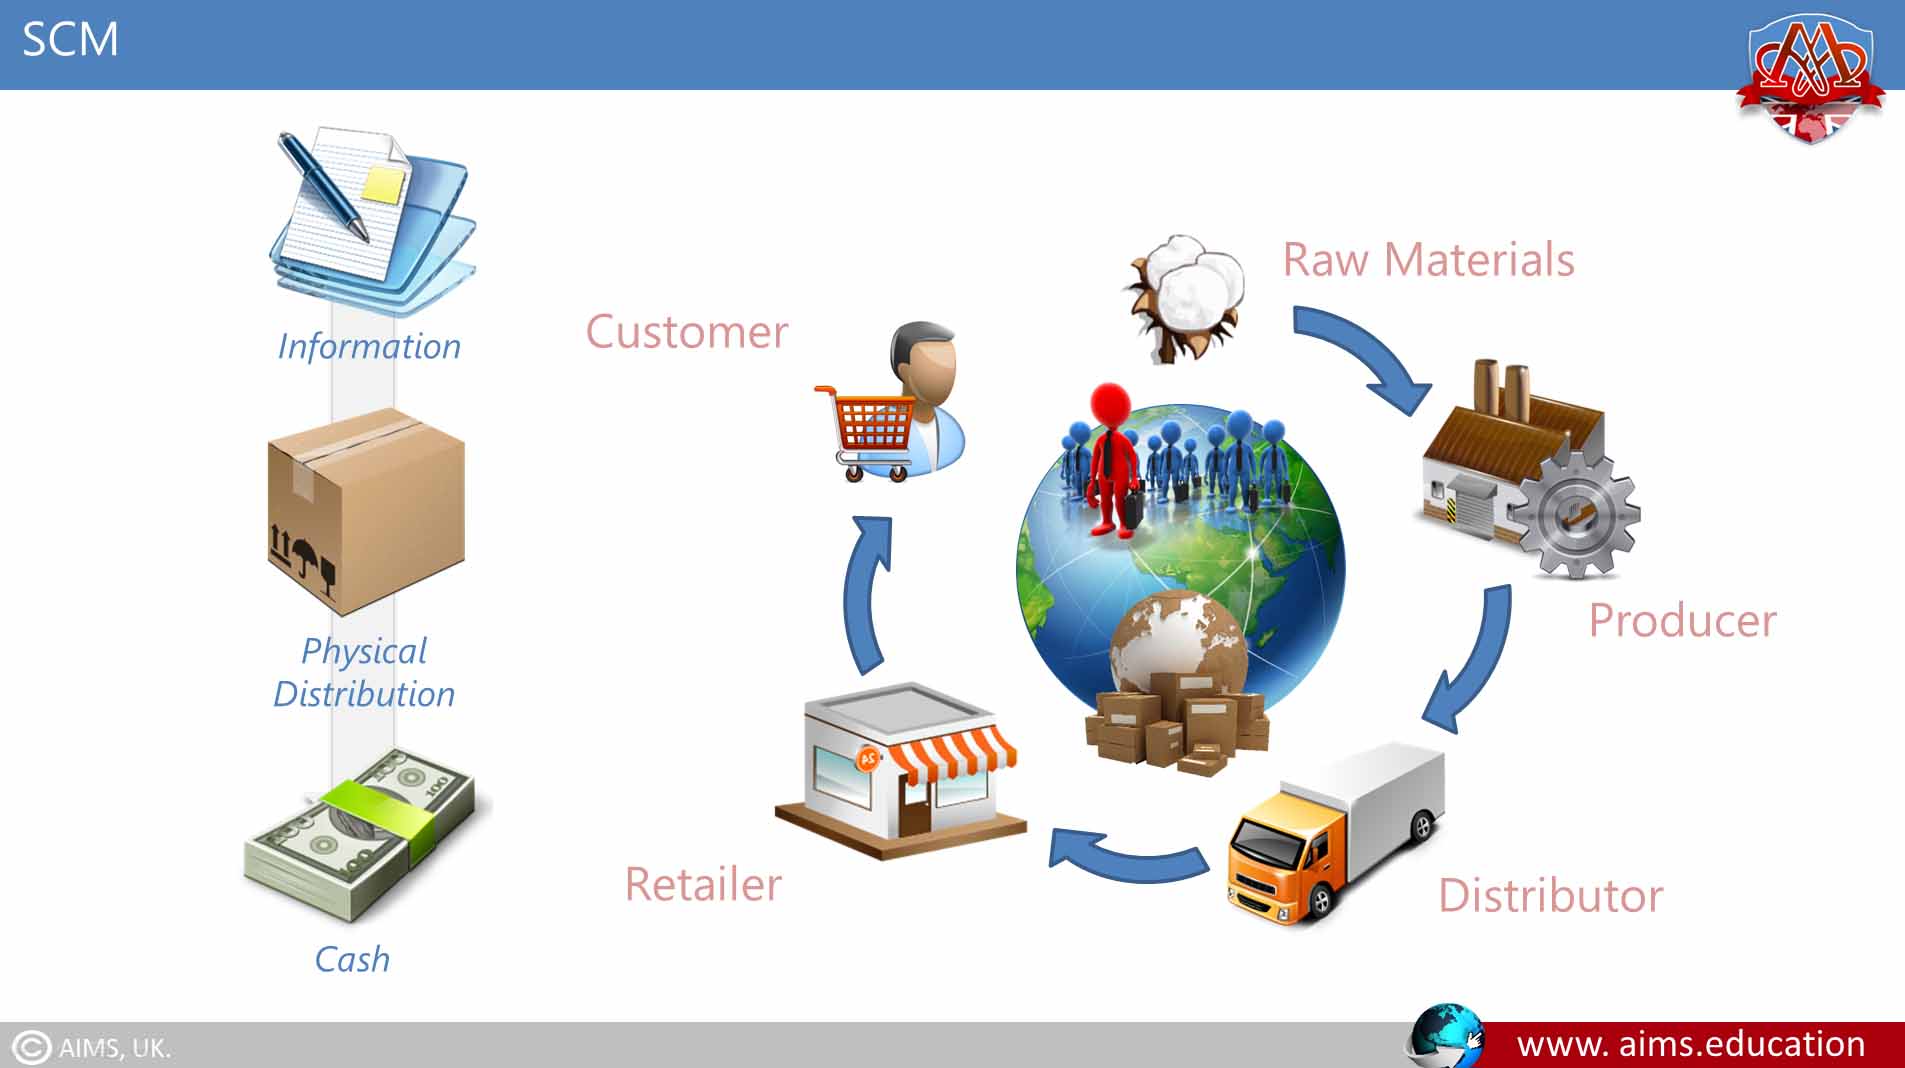 what is supply chain